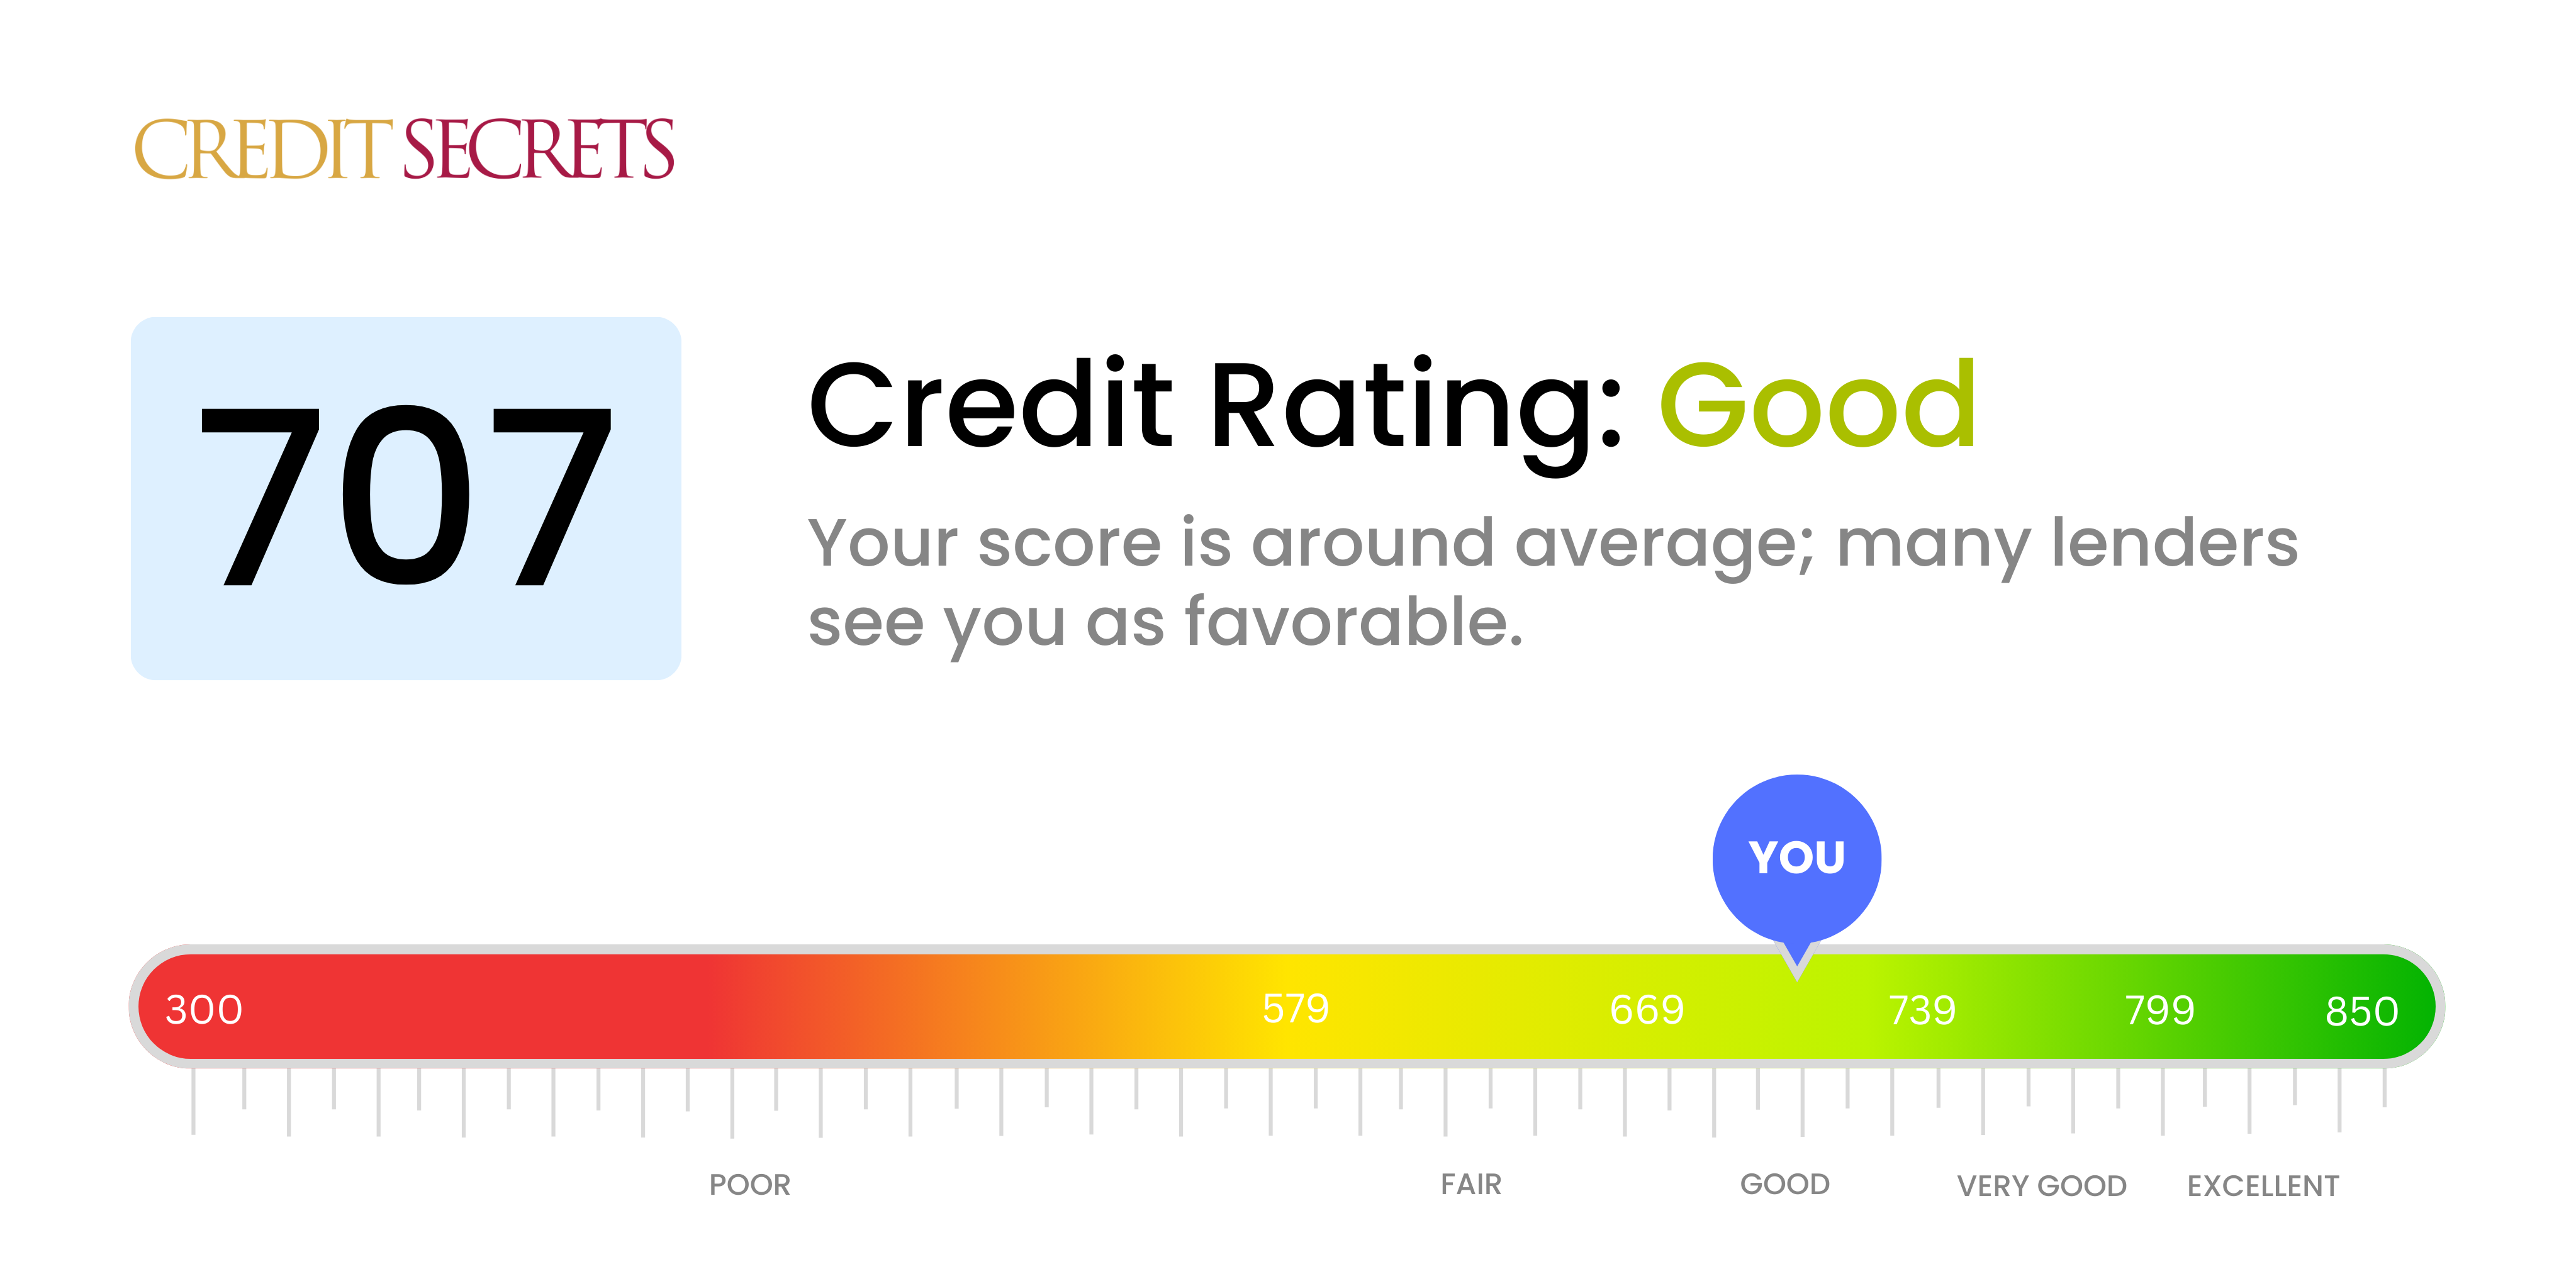 Is 707 a good credit score?